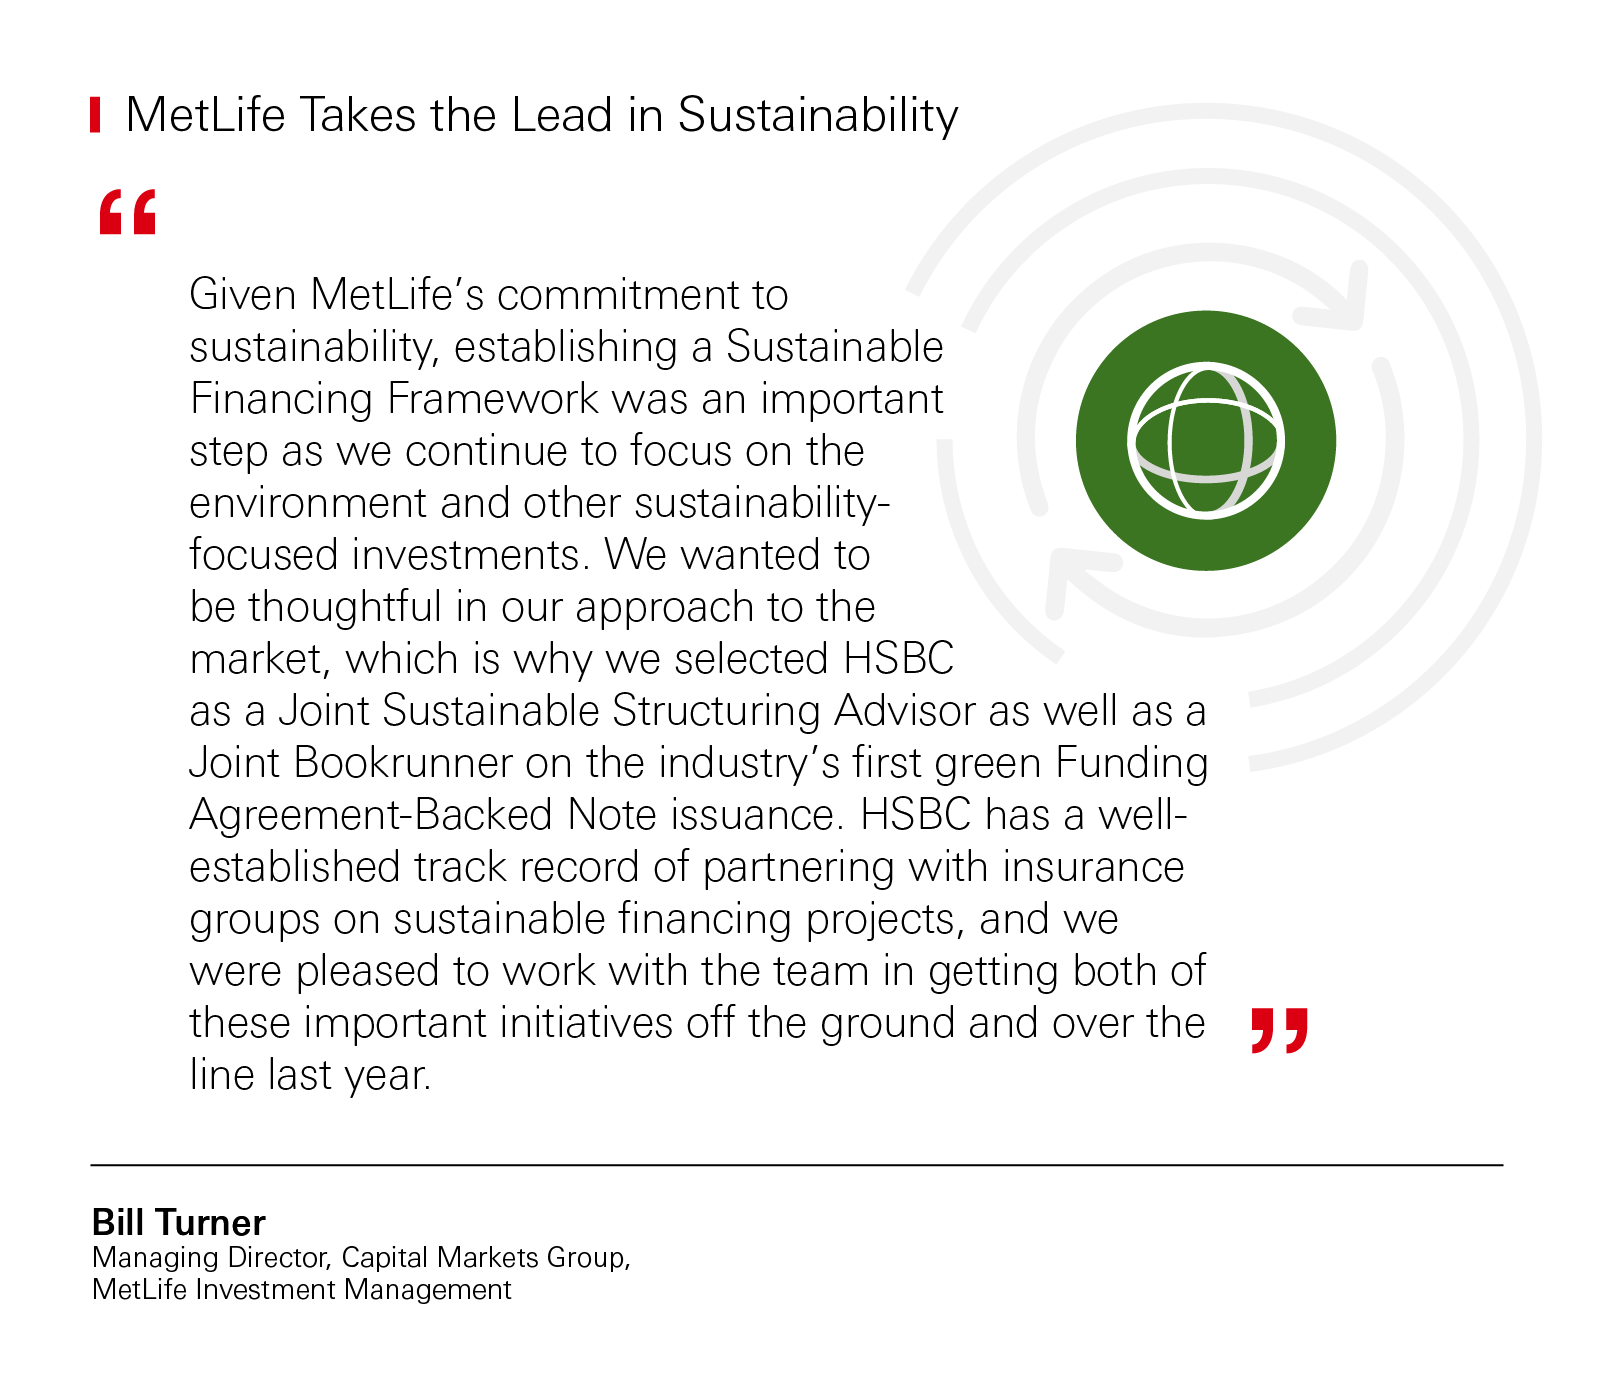 MetLife, Insurance companies, climate change, sustainability, sustainable finance